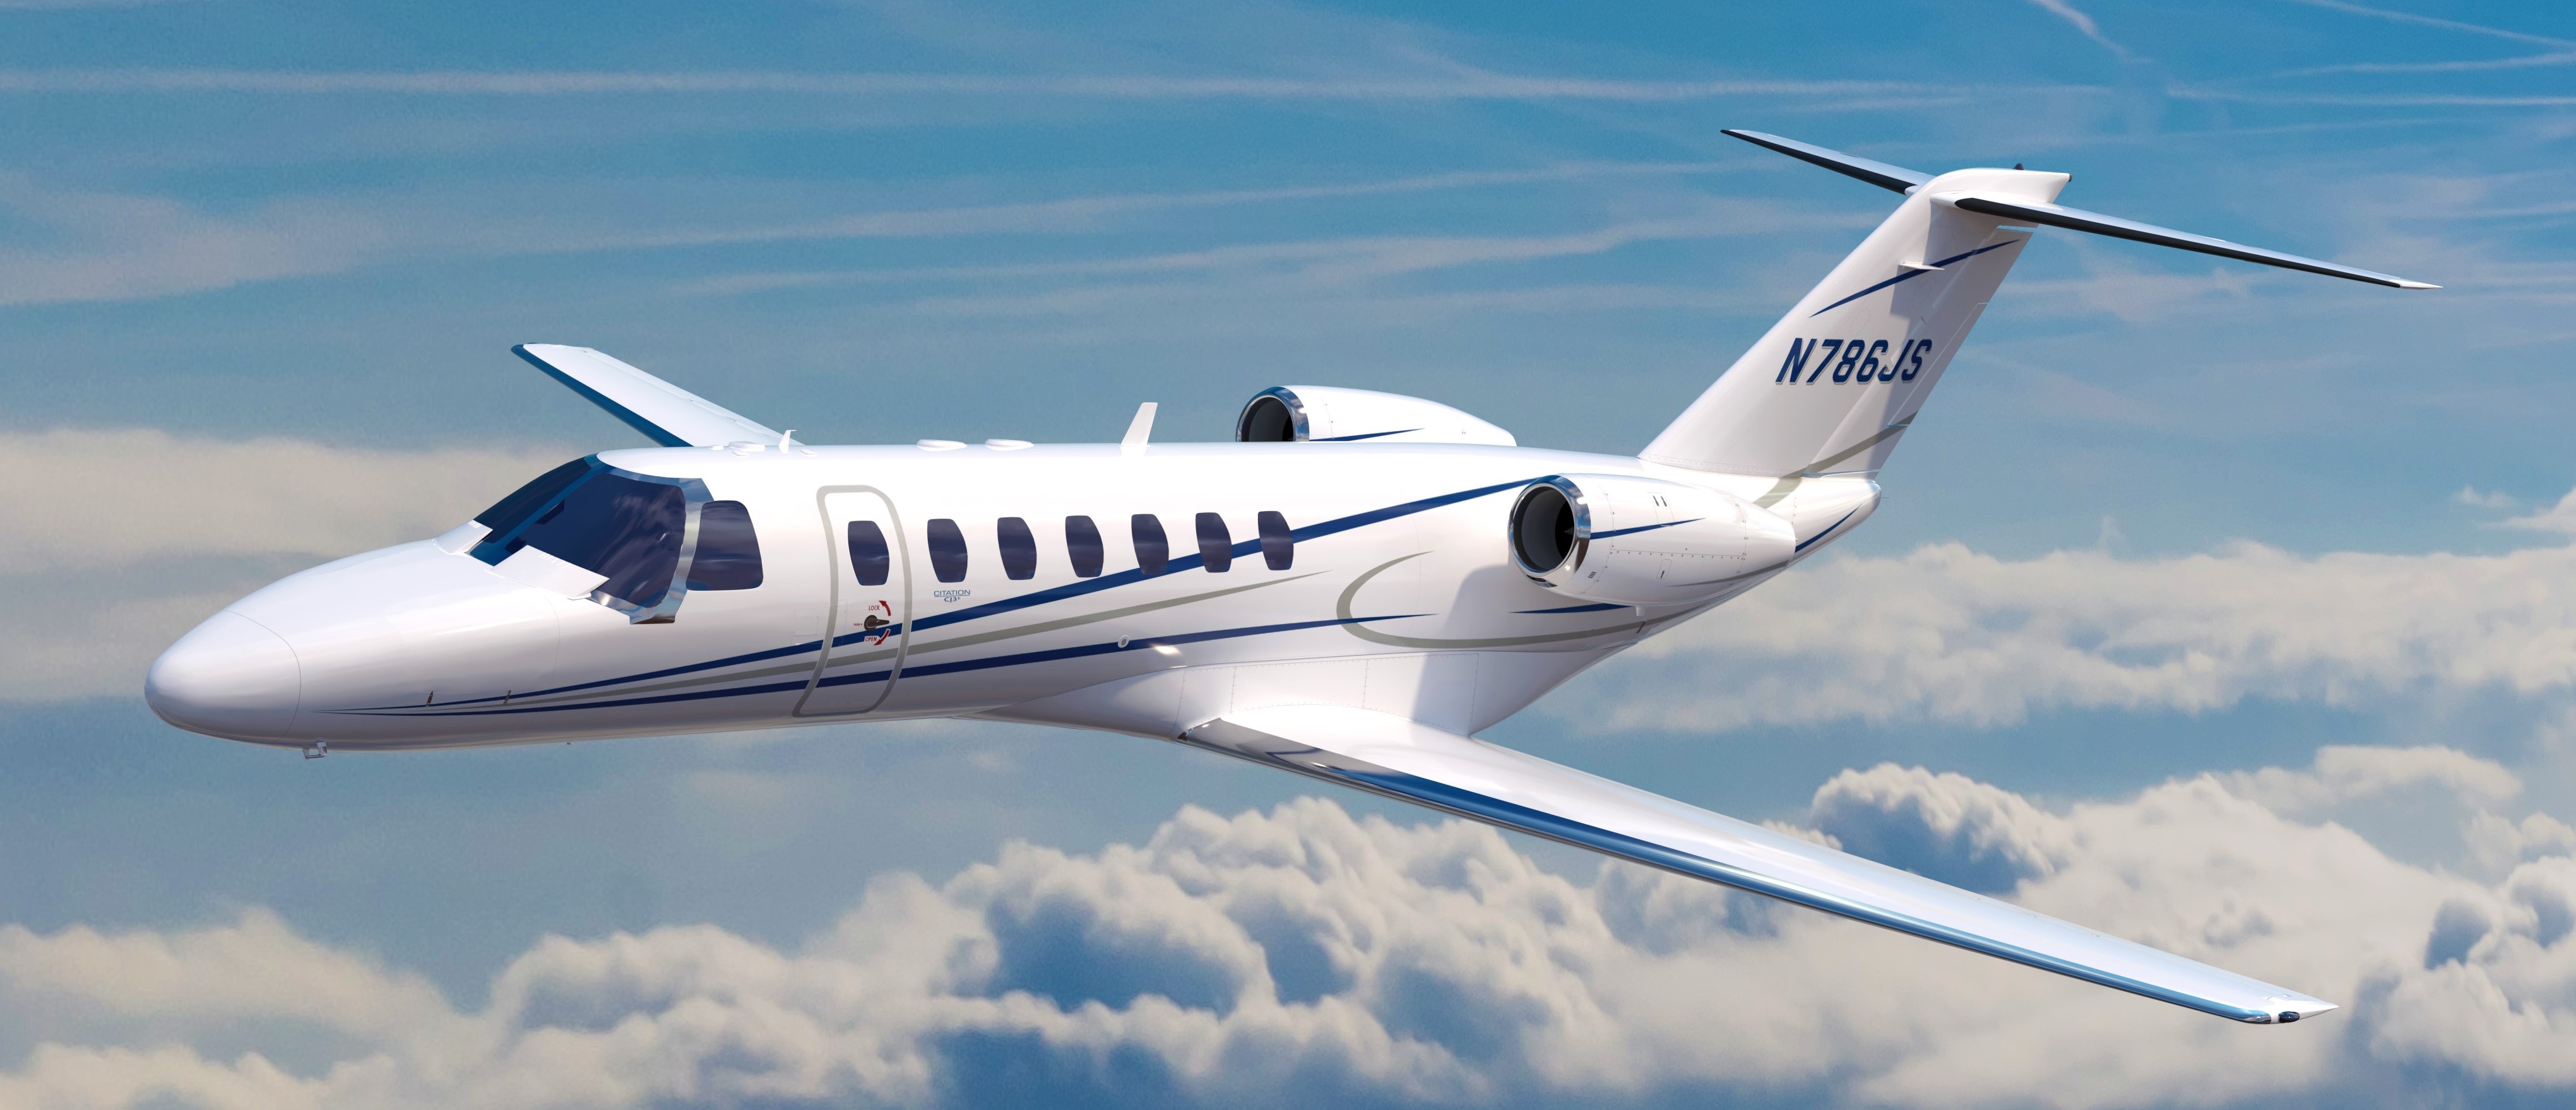 Kinston  based  'flyExclusive'  signed  a  purchase  agreement  with  Textron  Aviation  to  acquire  up to  30  Cessna  Citation  CJ3+  jets  !